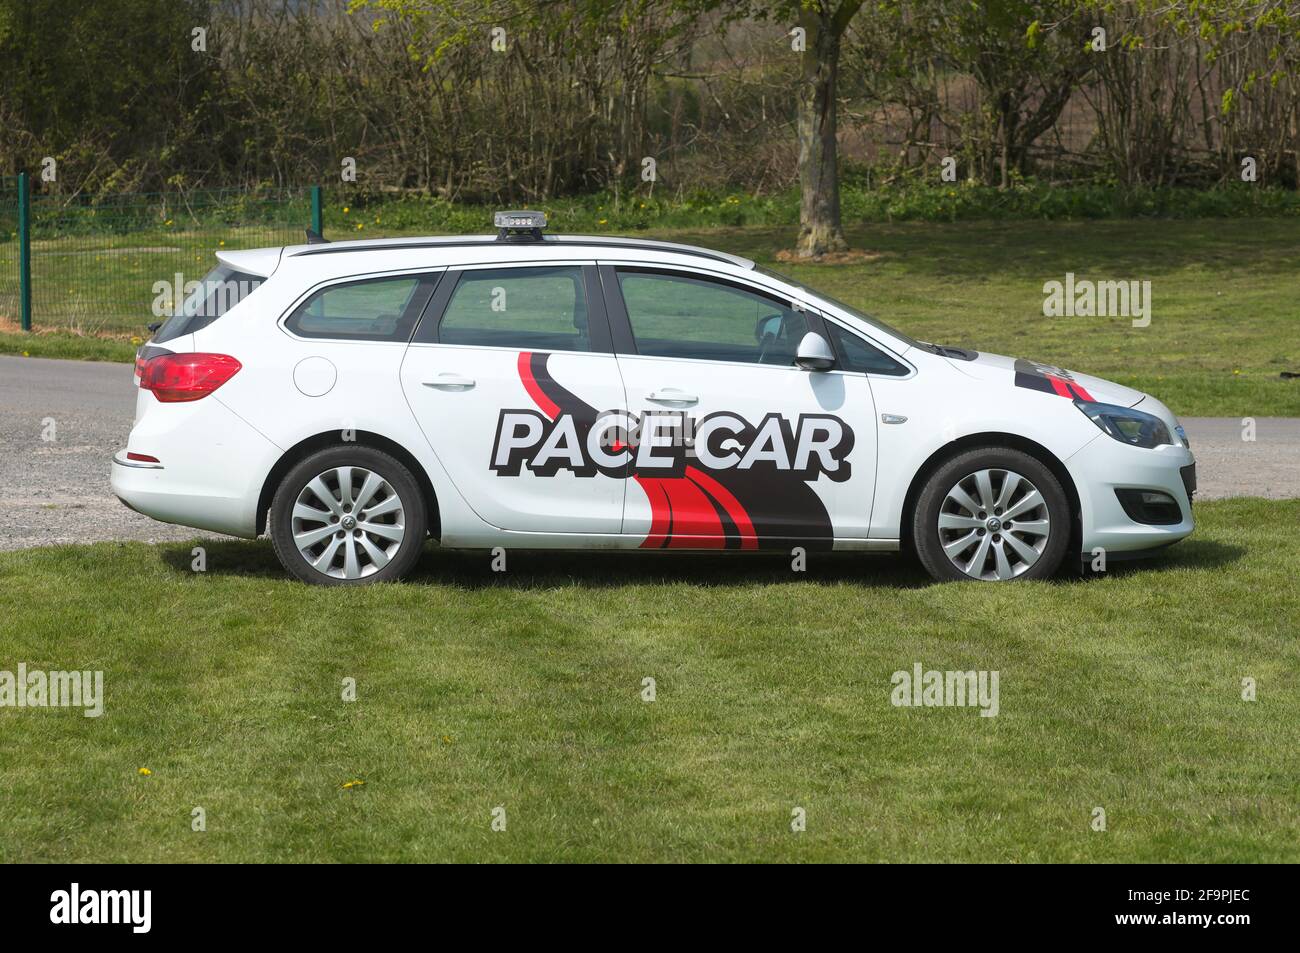 A Pace Car used to safely lead cars at motor racing events UK Stock Photo